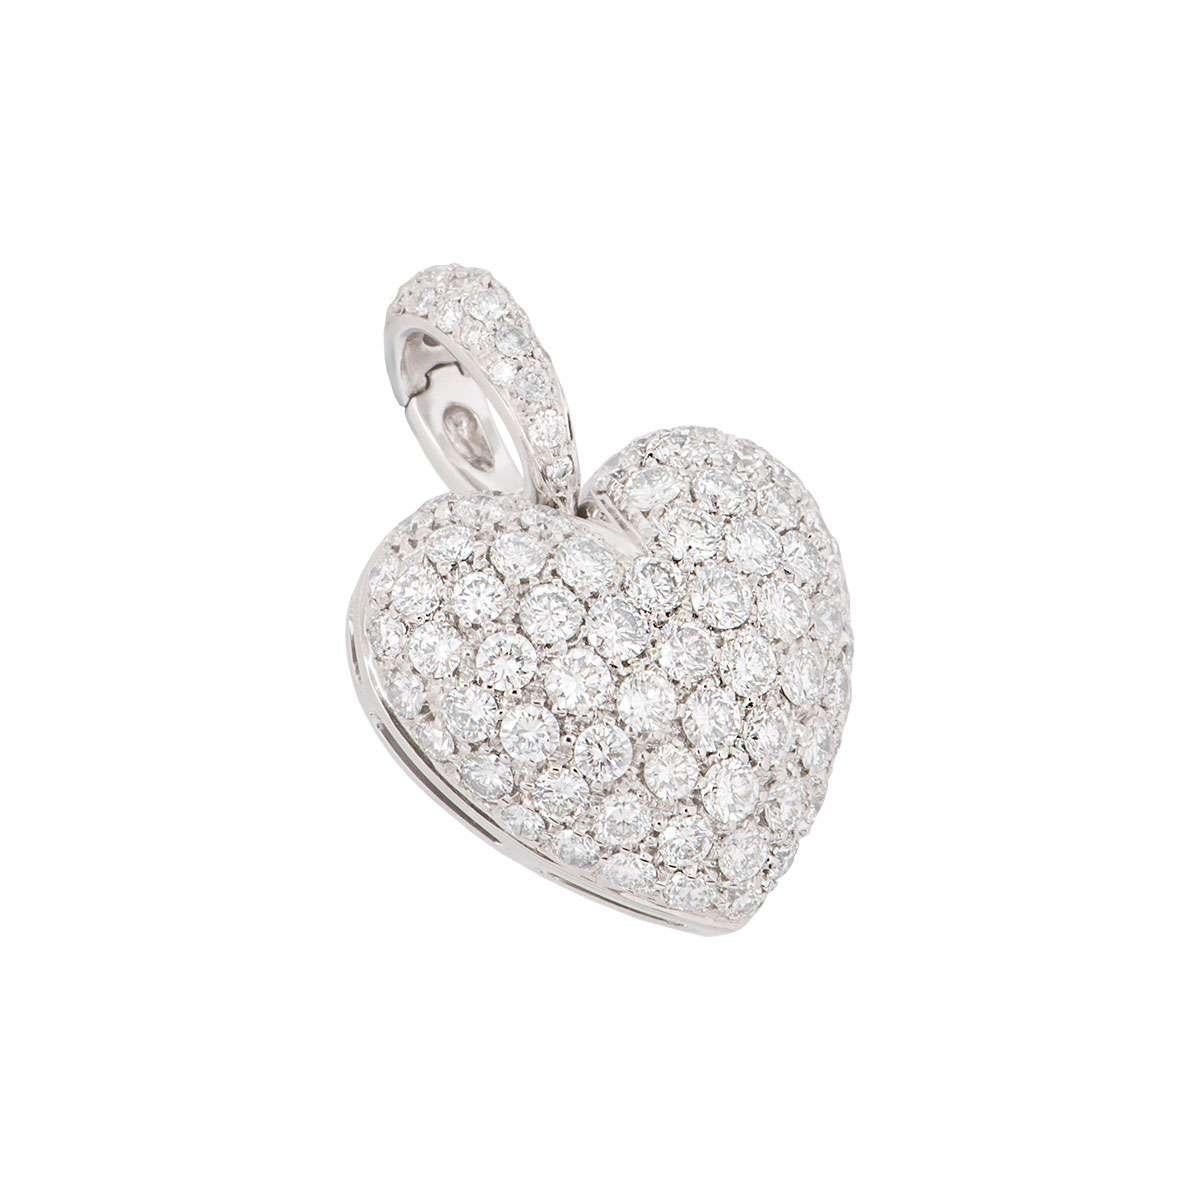 An 18k white gold diamond heart pendant. The heart shaped pendant is pave set with round brilliant cut diamonds which are also on the loop bail. There approximately 95 round brilliant cut diamonds which have an approximate weight of 1.97ct. The